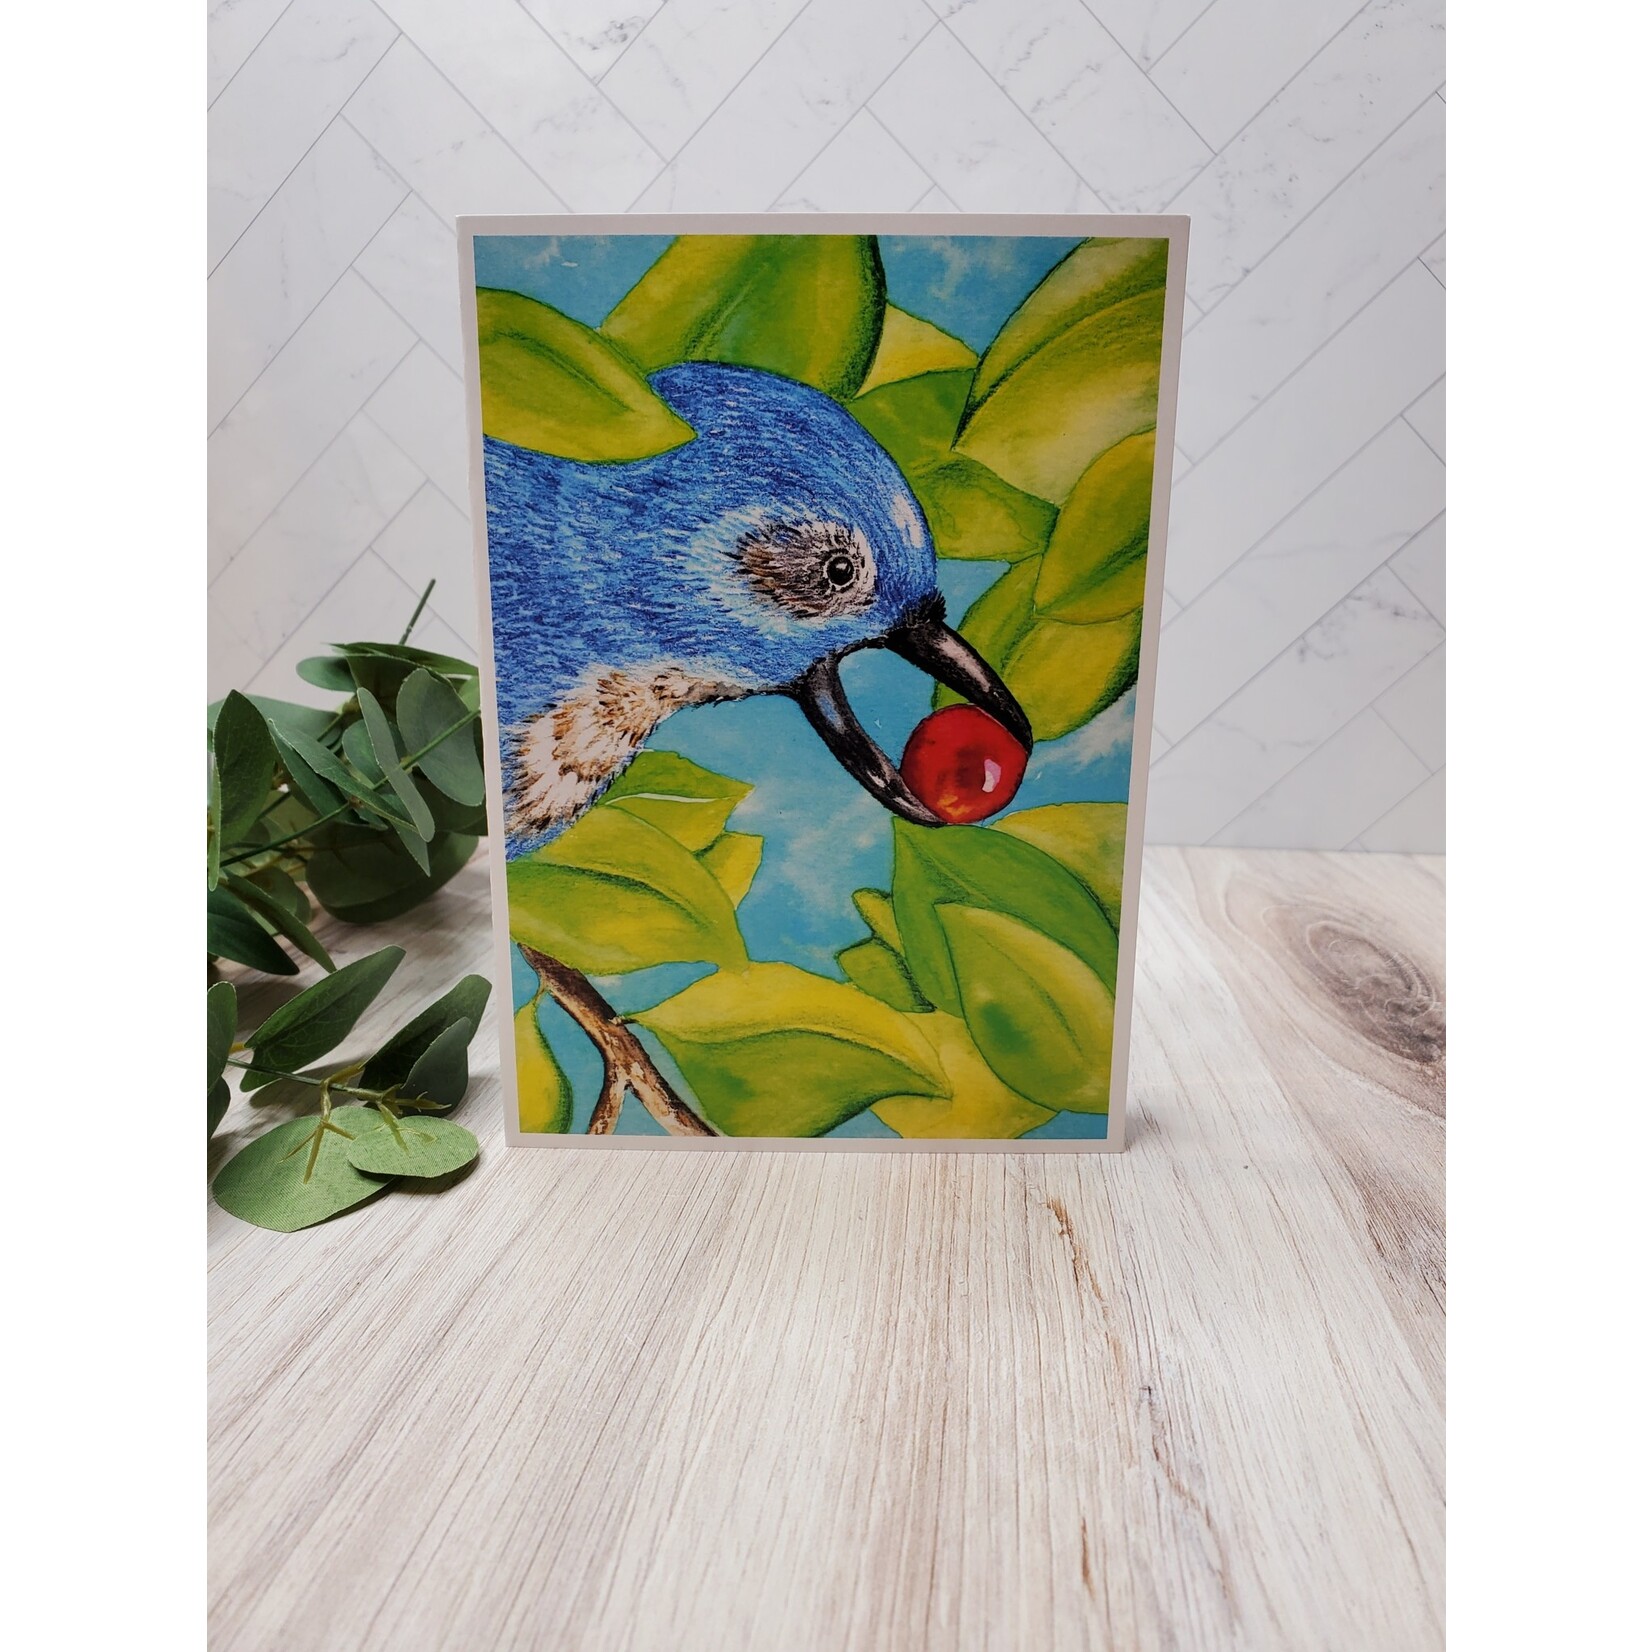 Bird in a Pine Blue Jay - Greeting Card